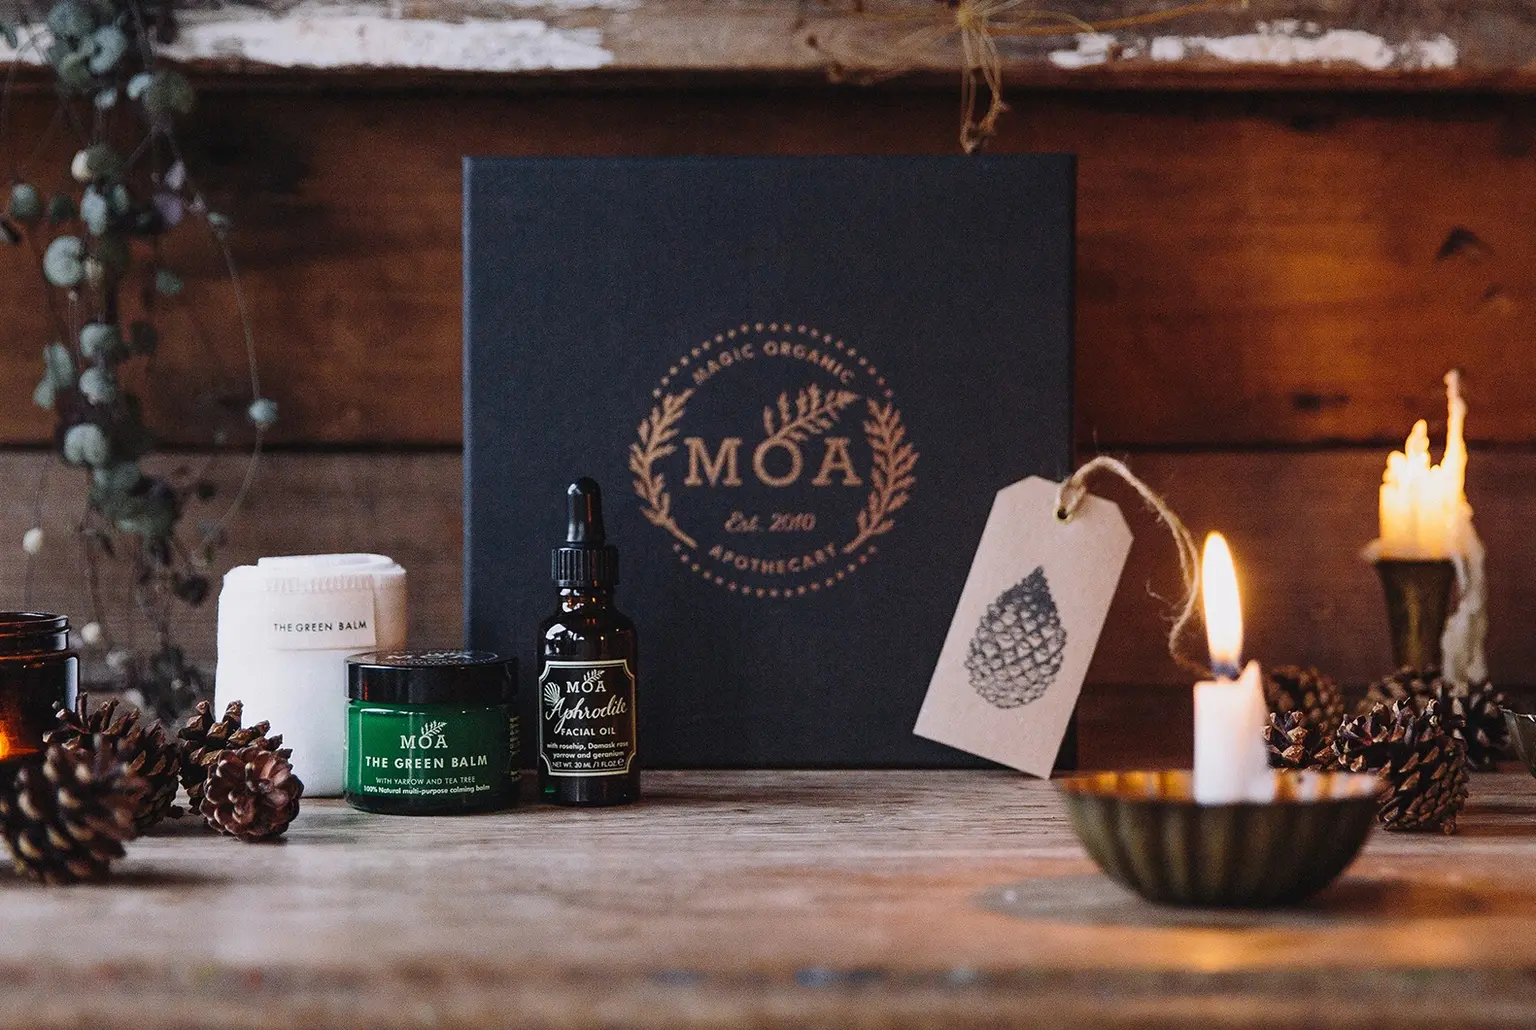 Skincare inspired by old herbal folklore